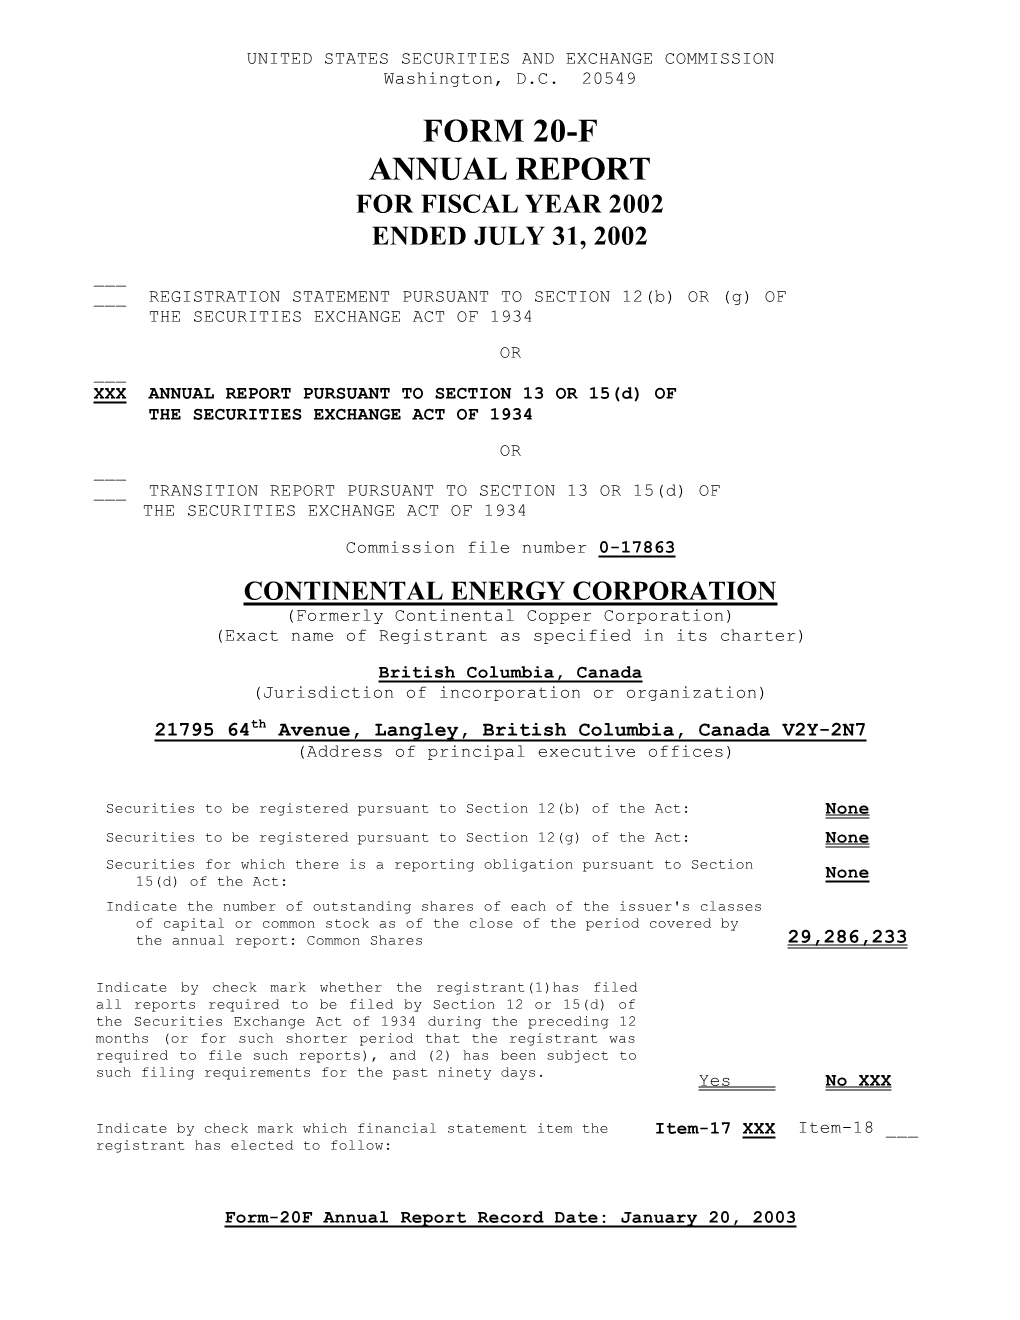 Form 20-F Annual Report for Fiscal Year 2002 Ended July 31, 2002